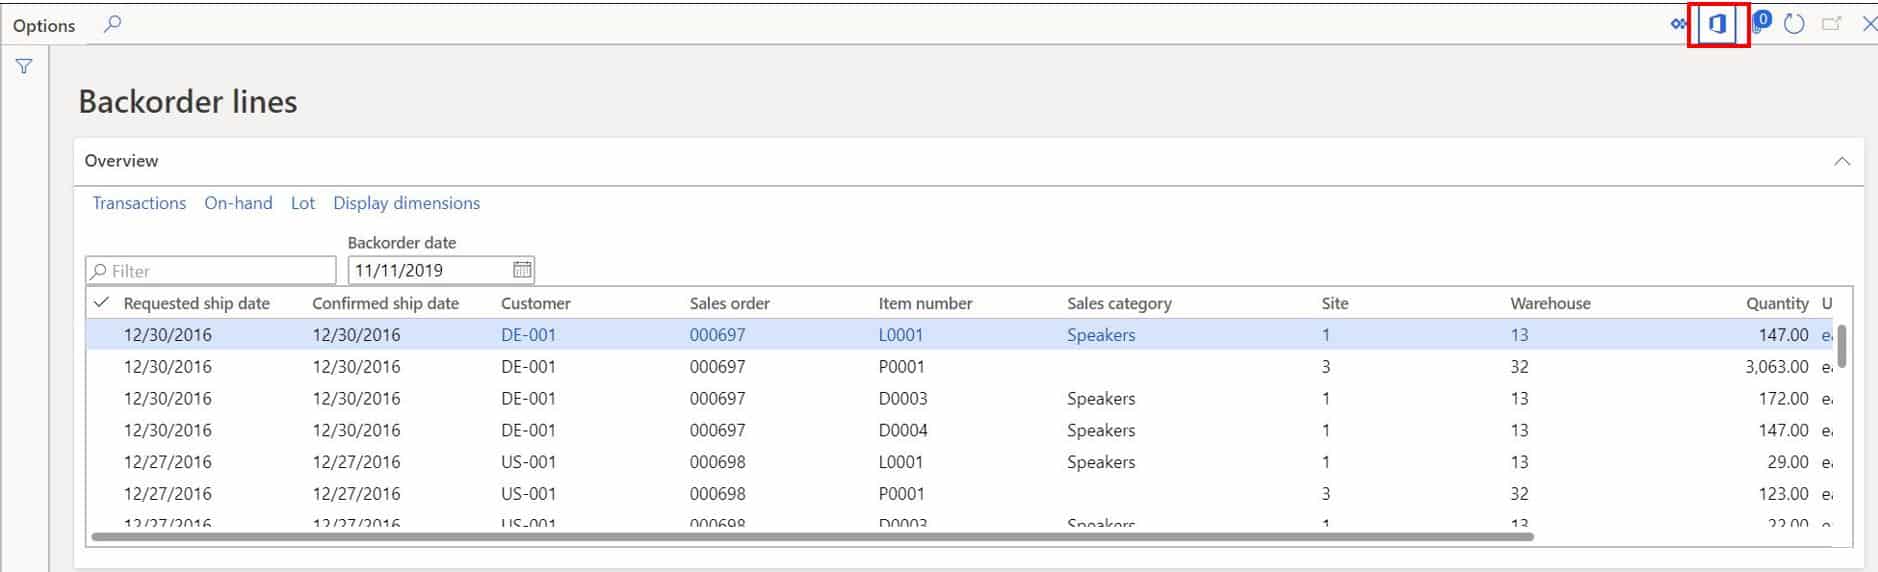 dynamics 365 for finance and operations feature list